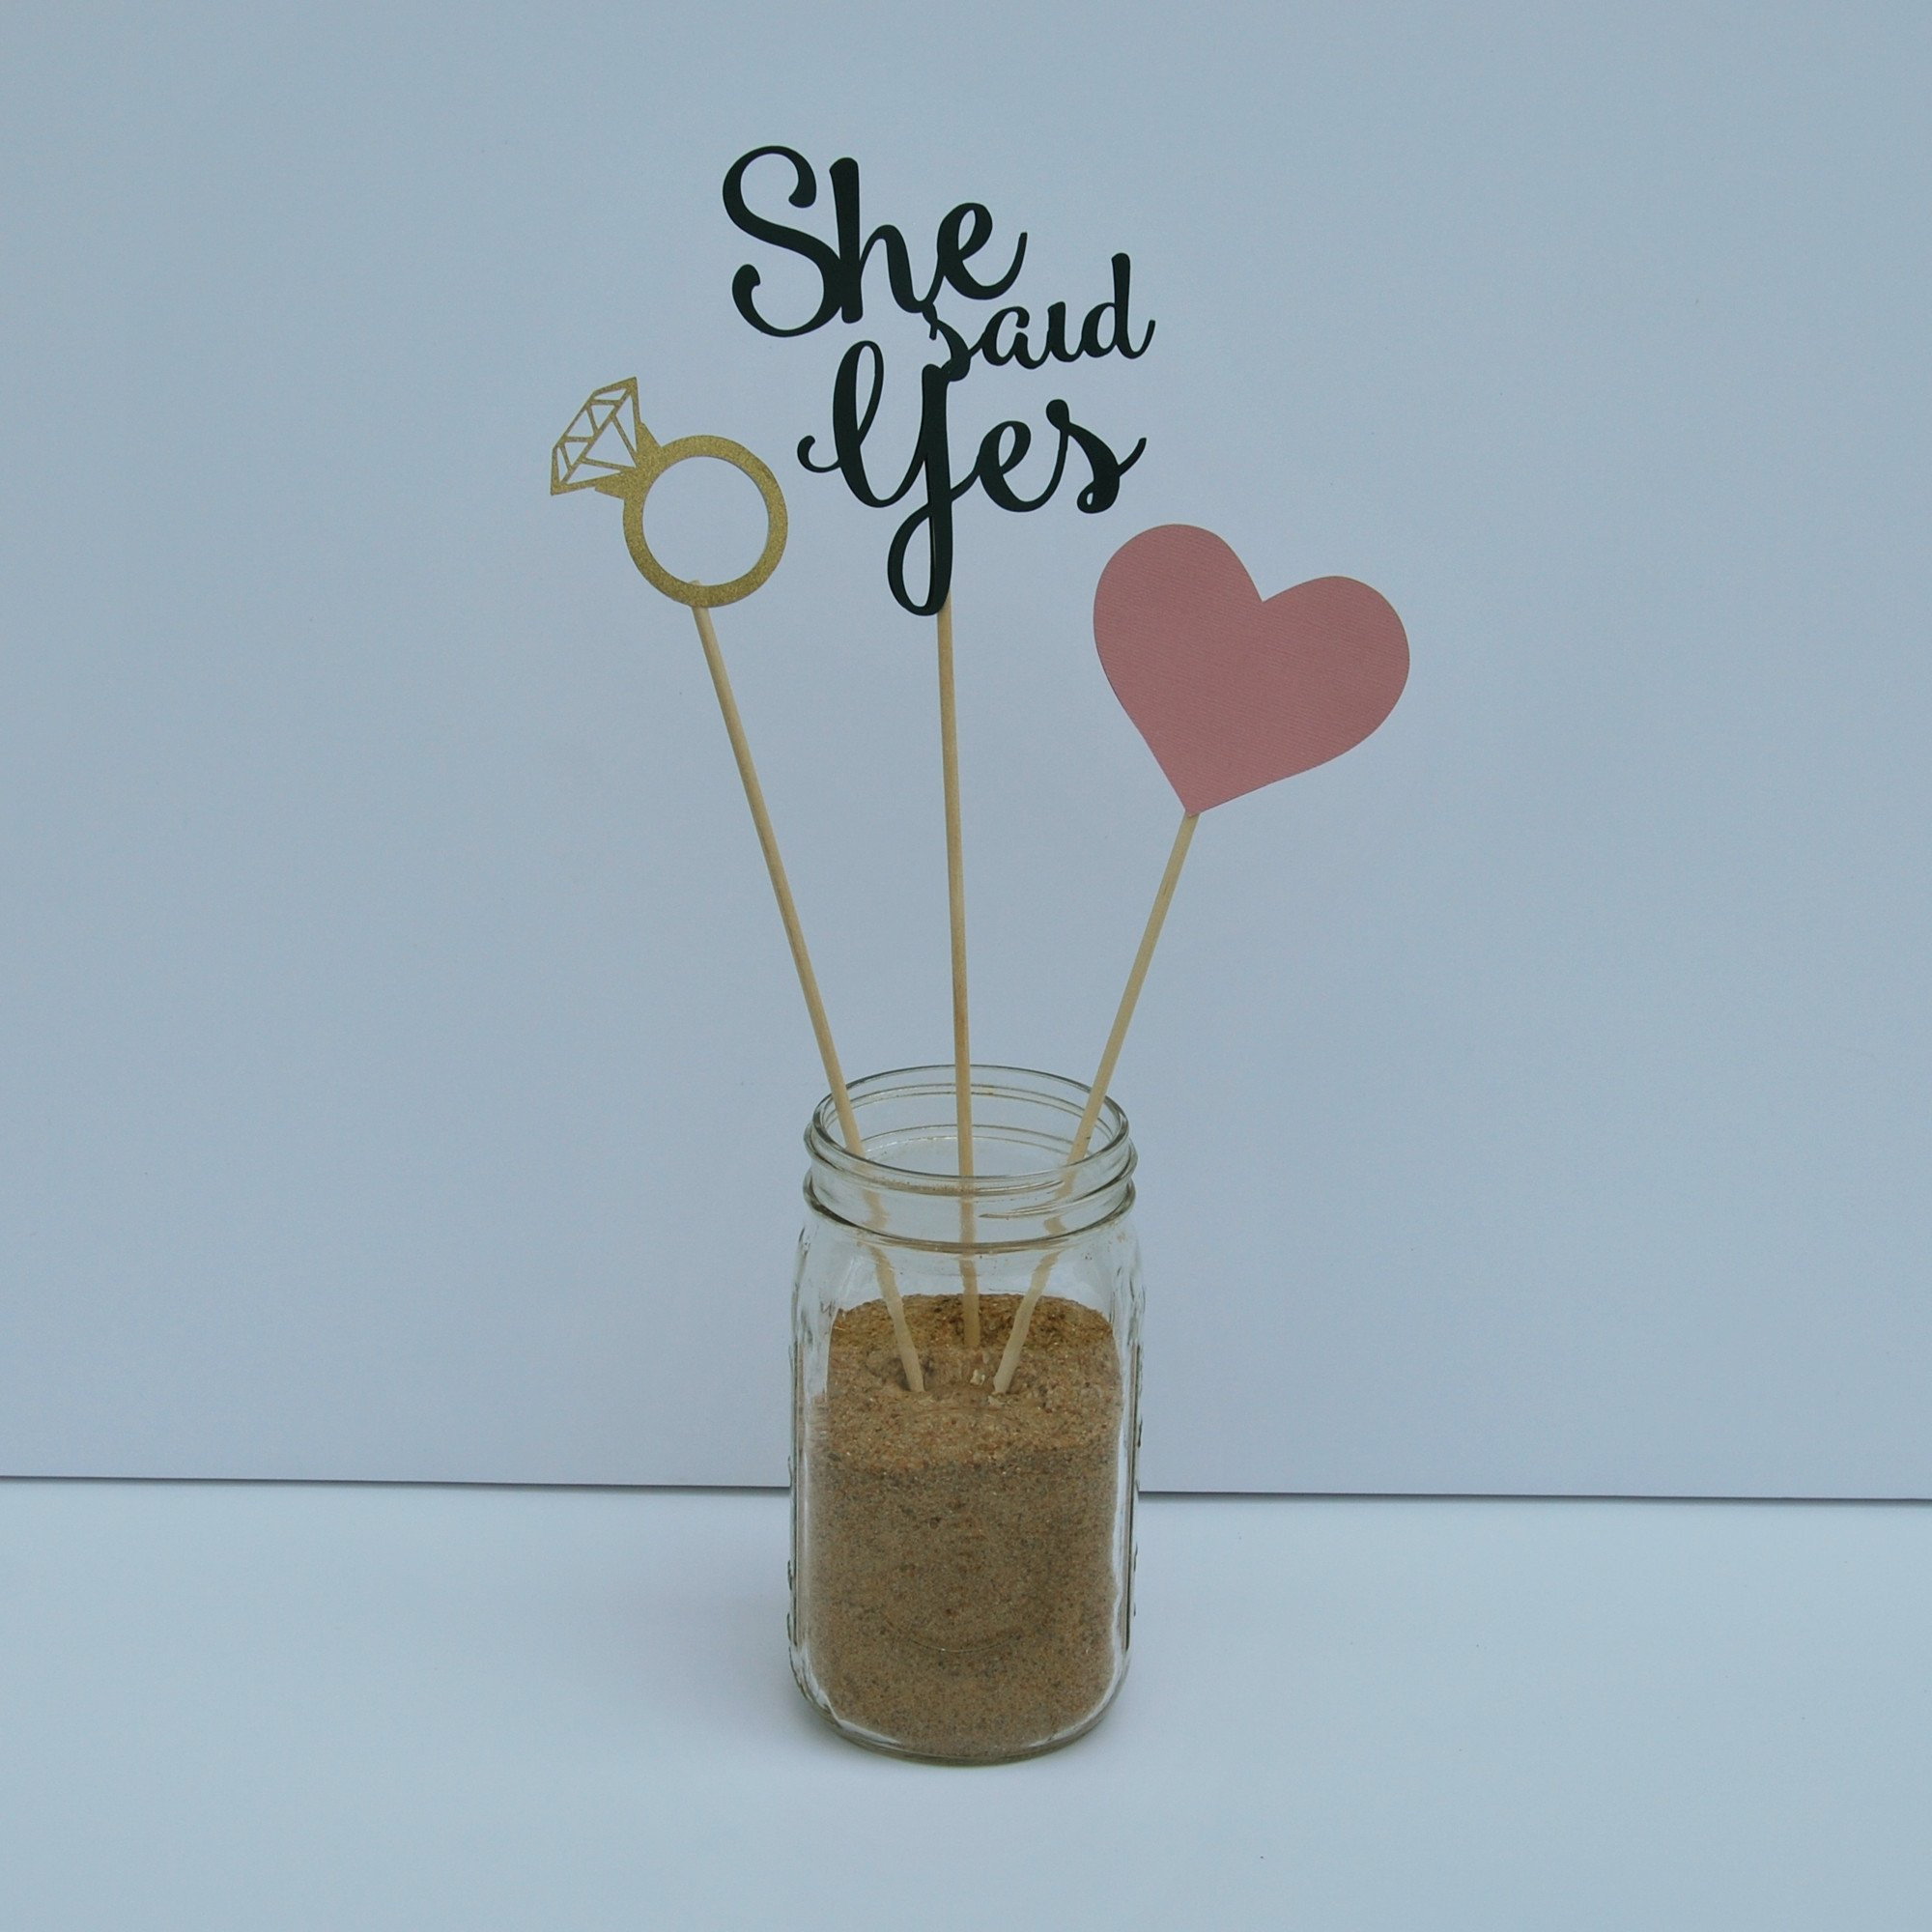 Centerpieces For Engagement Party Ideas
 "She Said Yes" Engagement Party Centerpiece for Pinterest